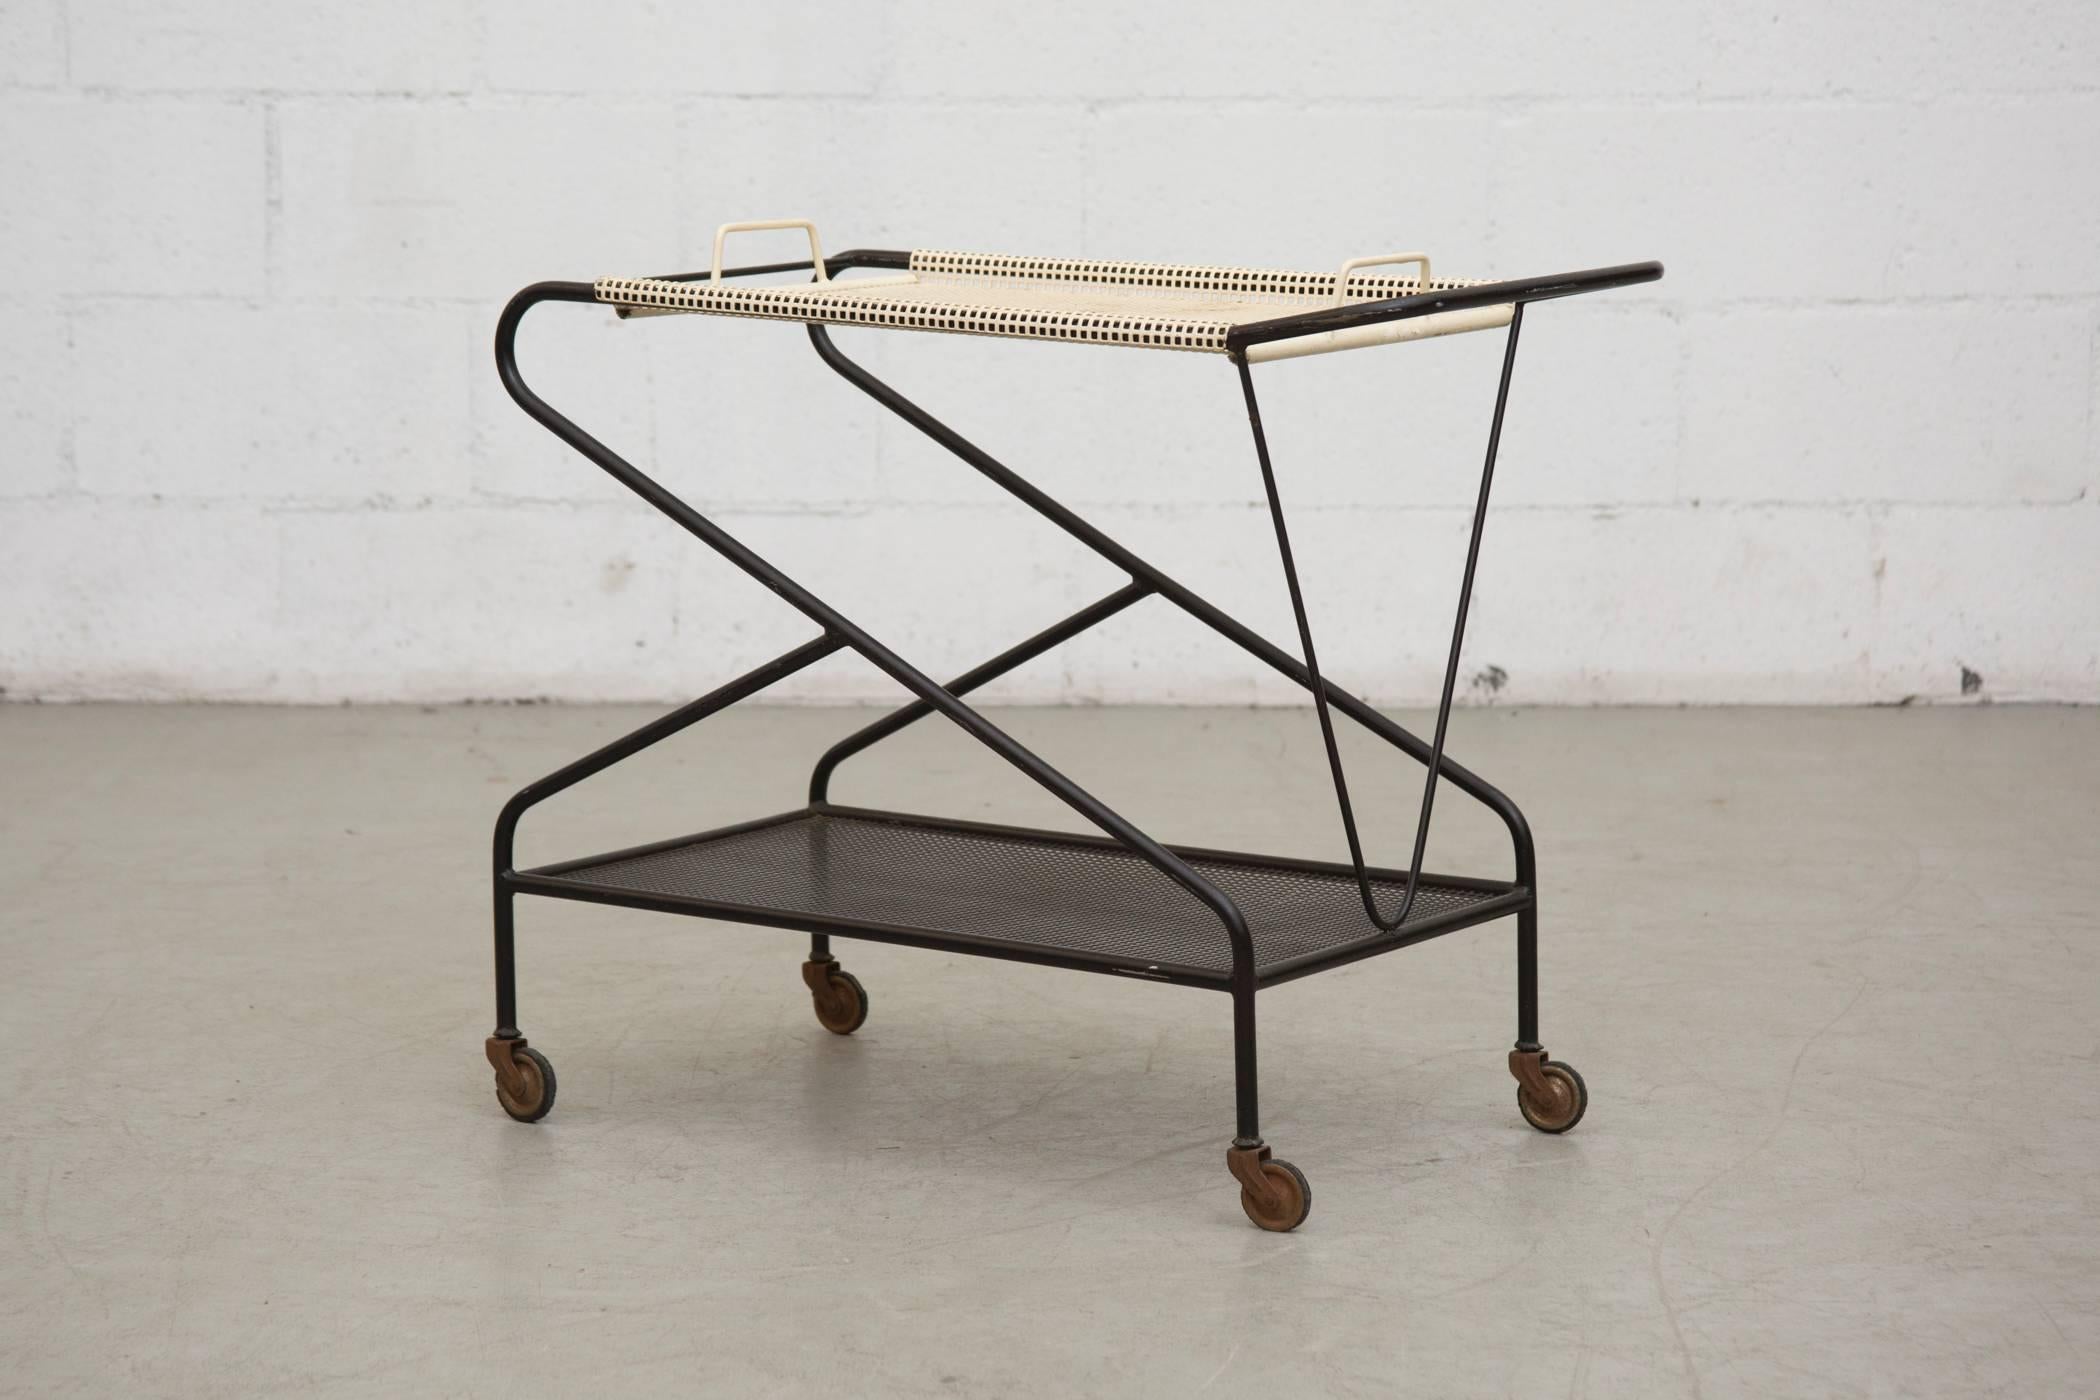 Utterly cool Mathieu Mategot inspired, rare Pilastro rolling cart with perforated shelves. Top shelf is a removable handled tray. Visible wear and some enamel loss with slight signs of surface rust. Wheels have heavy surface rust as well. In